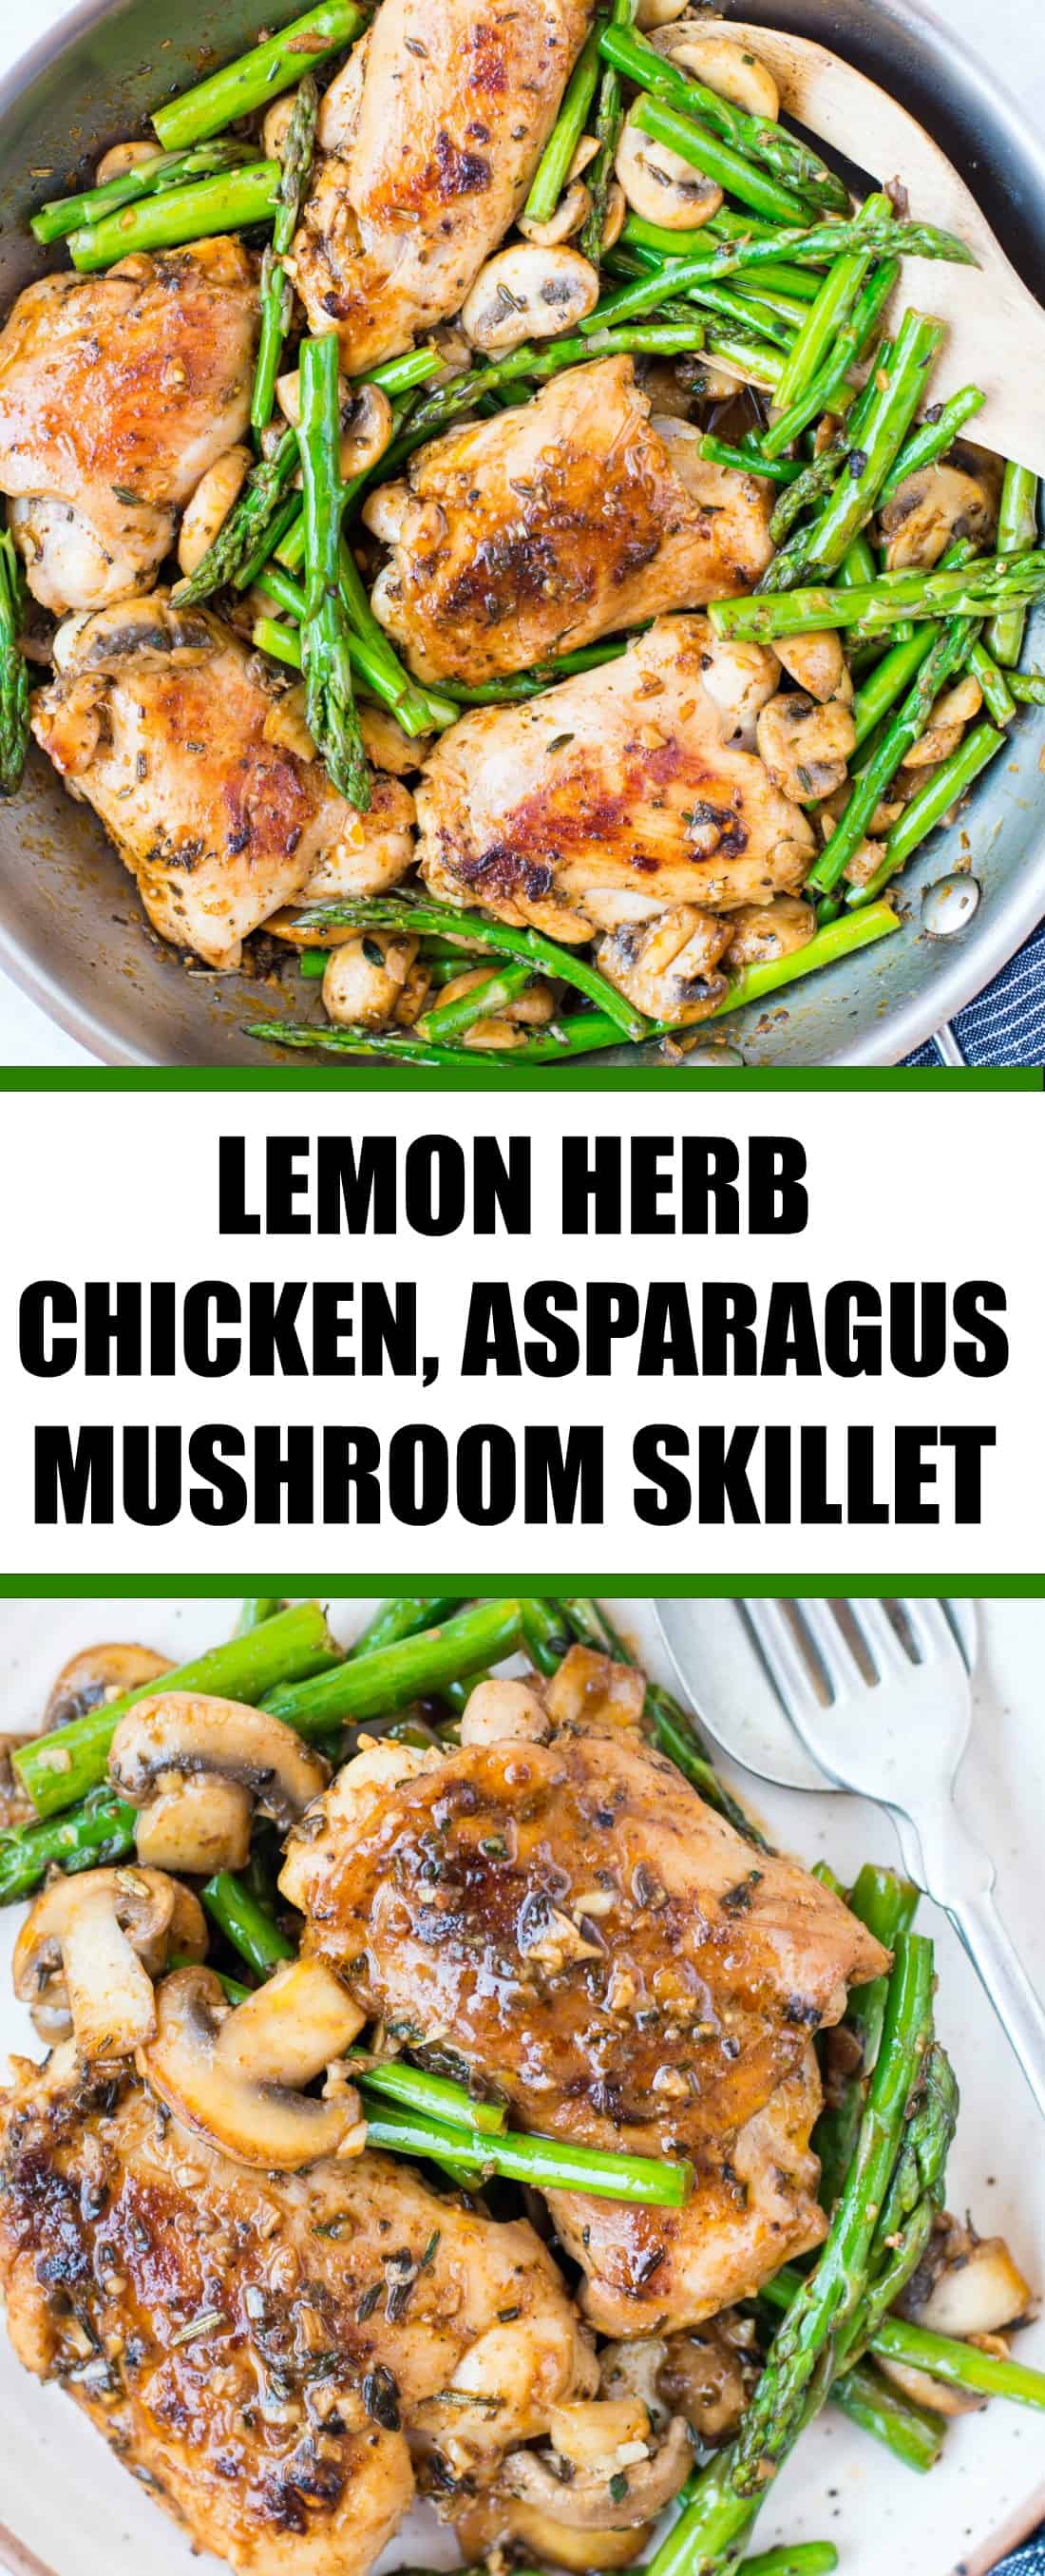 Pin of Chicken and Asparagus with mushroom in a lemon herb butter sauce